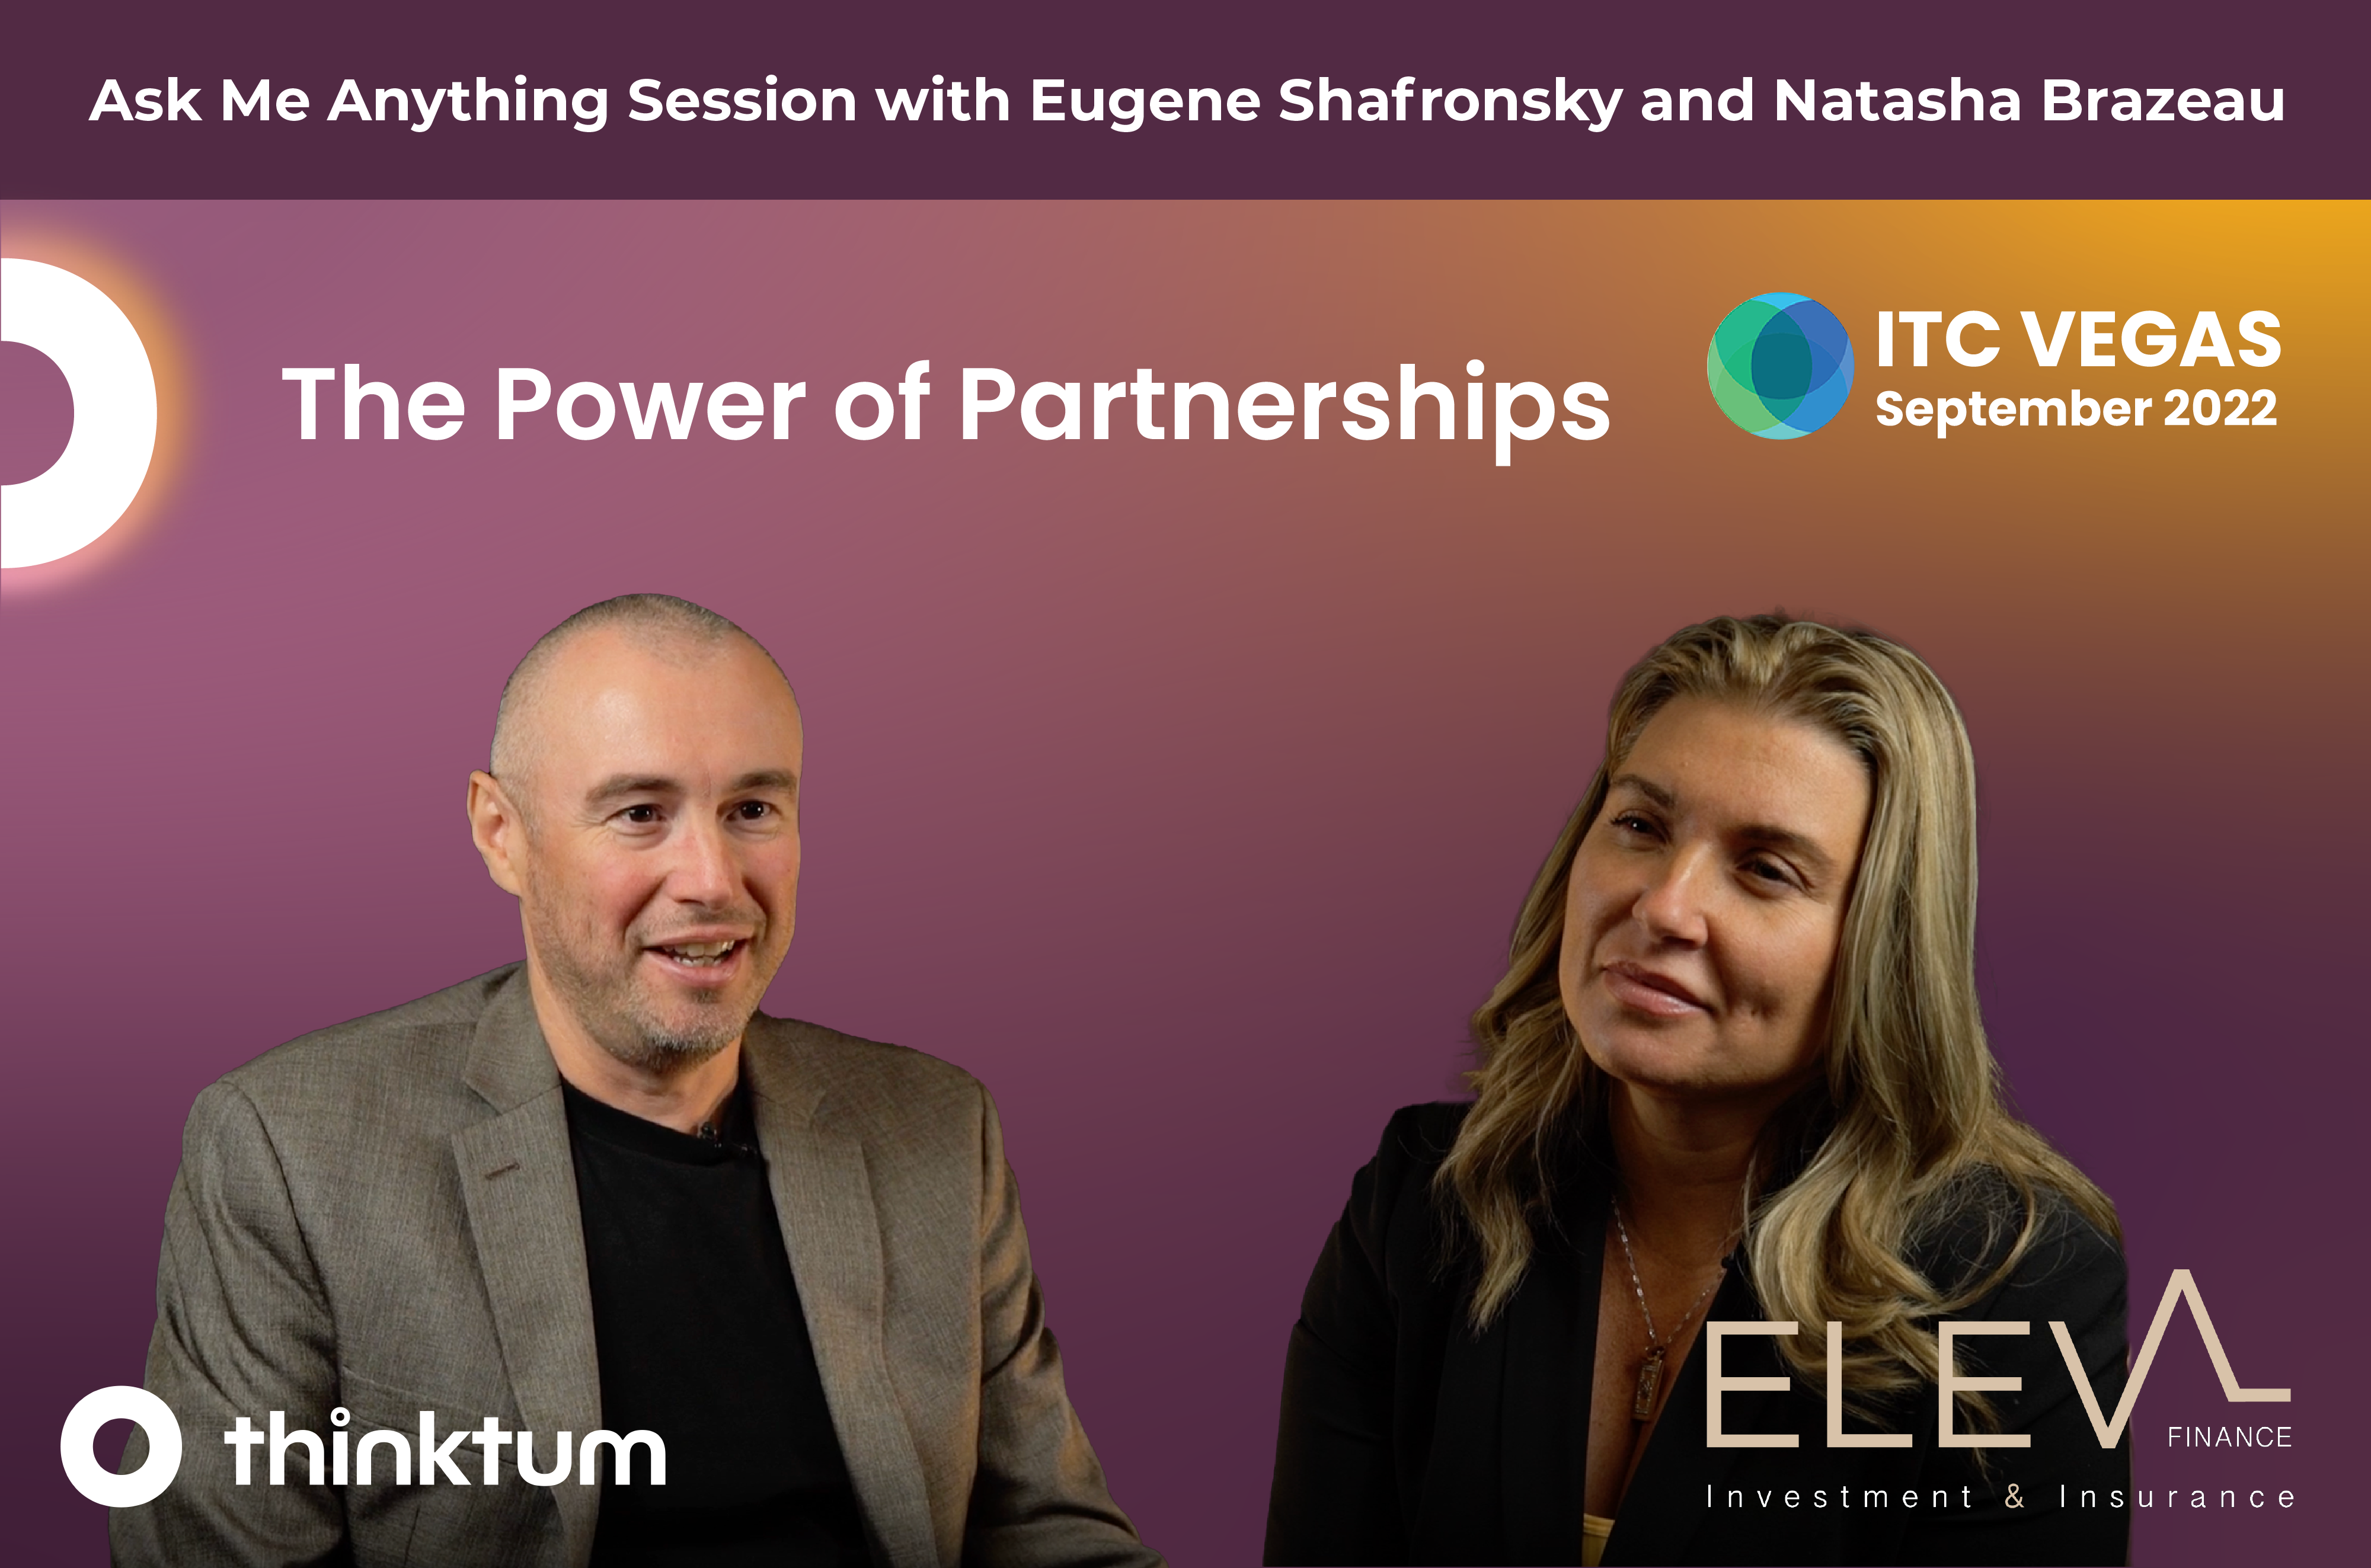 Ad for an Ask me Anything session with FF News, Eugene Shafronsky and Natasha Brazeau with photos of guests, The Power of Partnerships, with Eleva Finance, thinktum, FF News, and ITC Vegas logos.